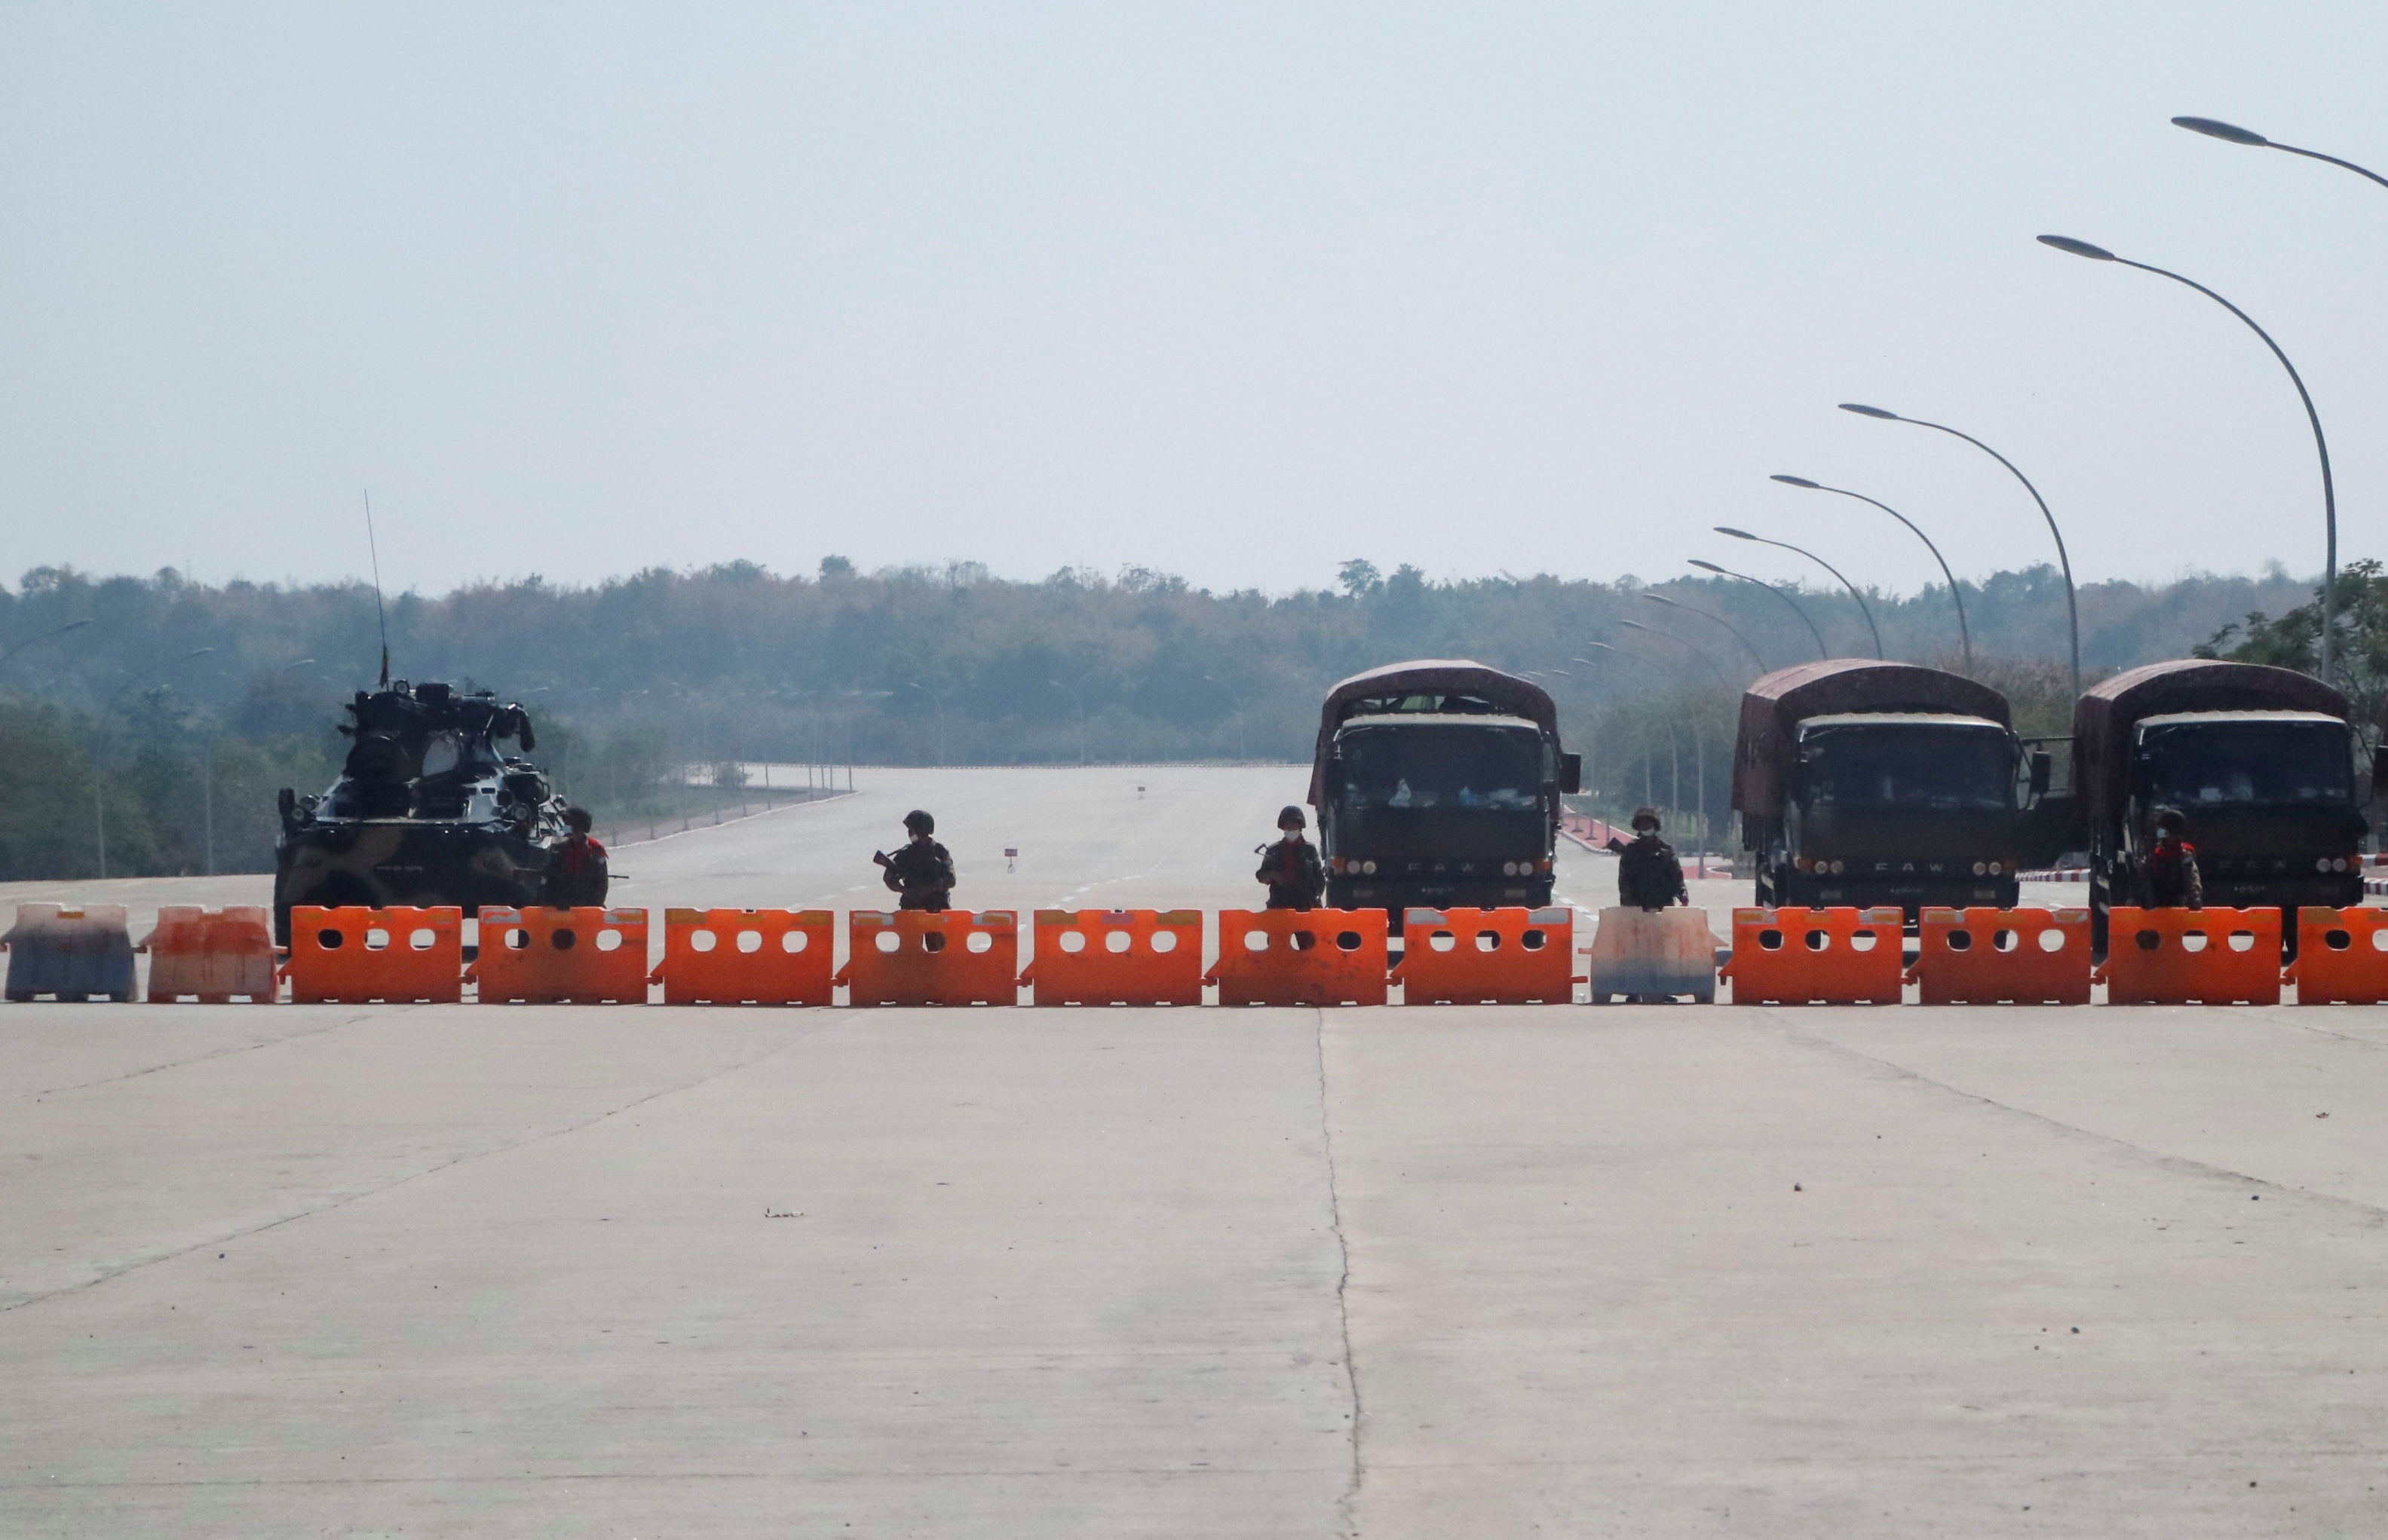 Soldiers at a blockaded road to Myanmar’s parliament in Naypyidaw during the February 1, 2021 coup.